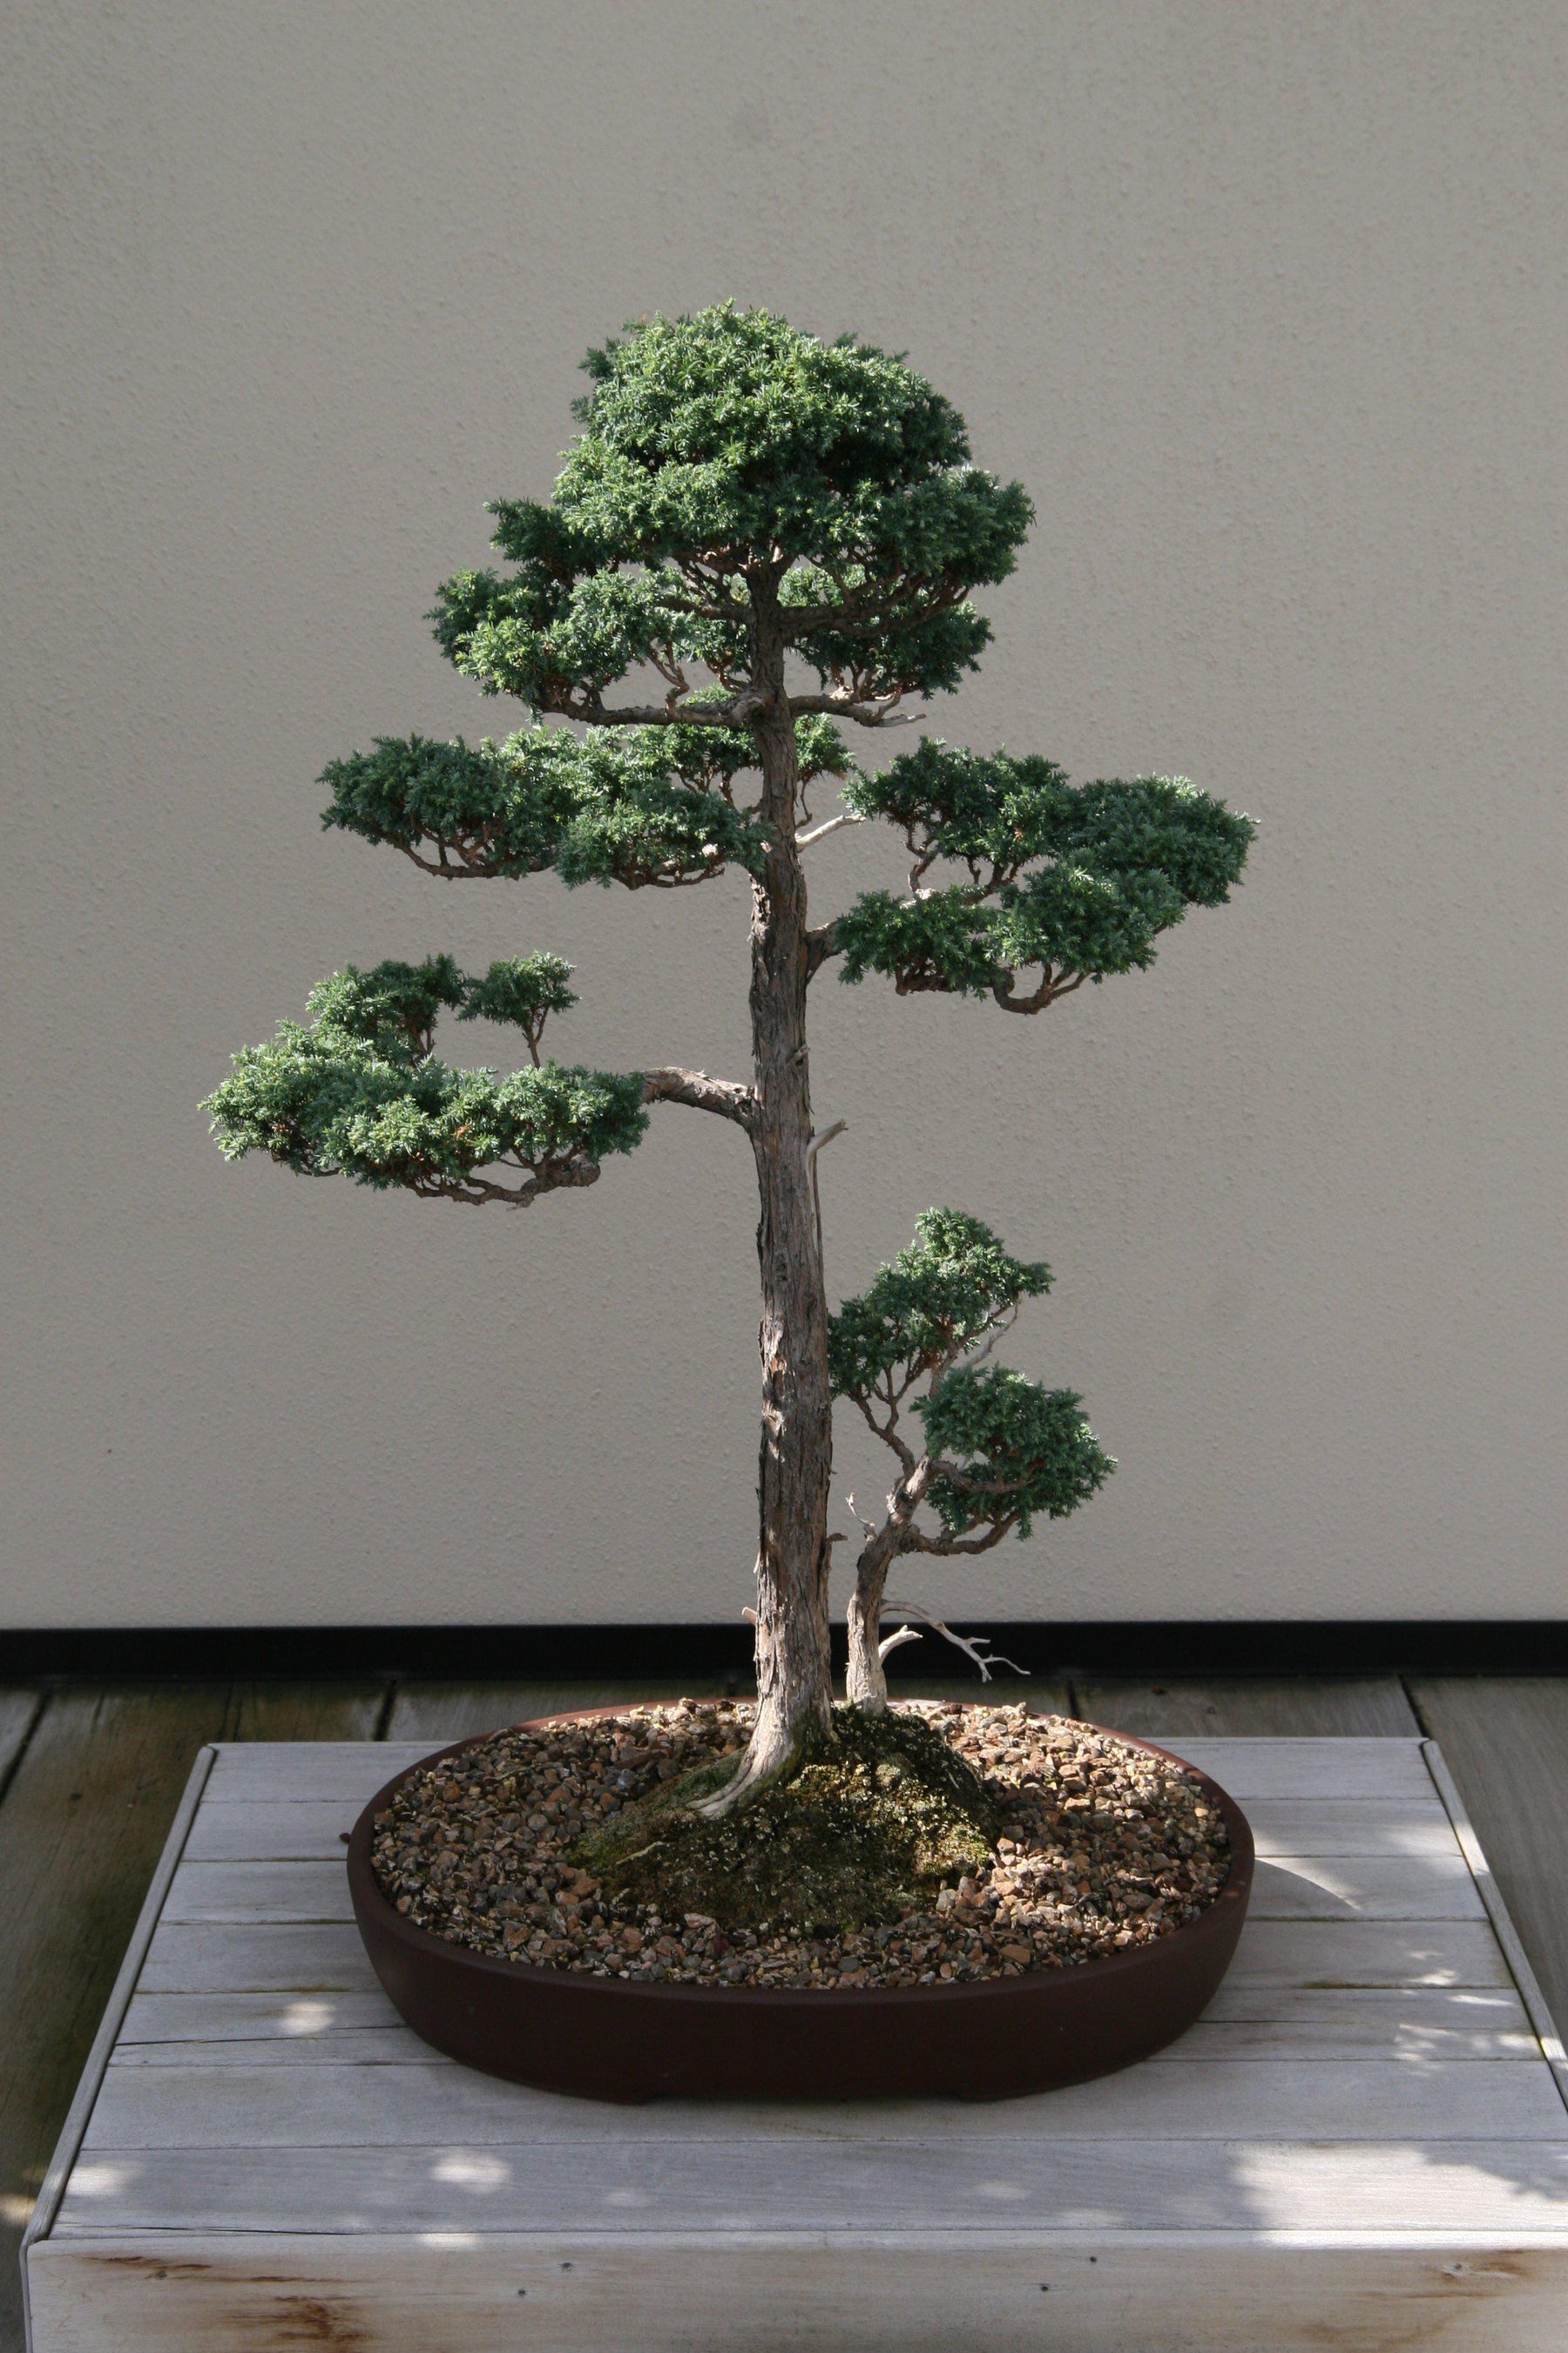 How To Care For Your Blue Moss Cypress Bonsai Tree